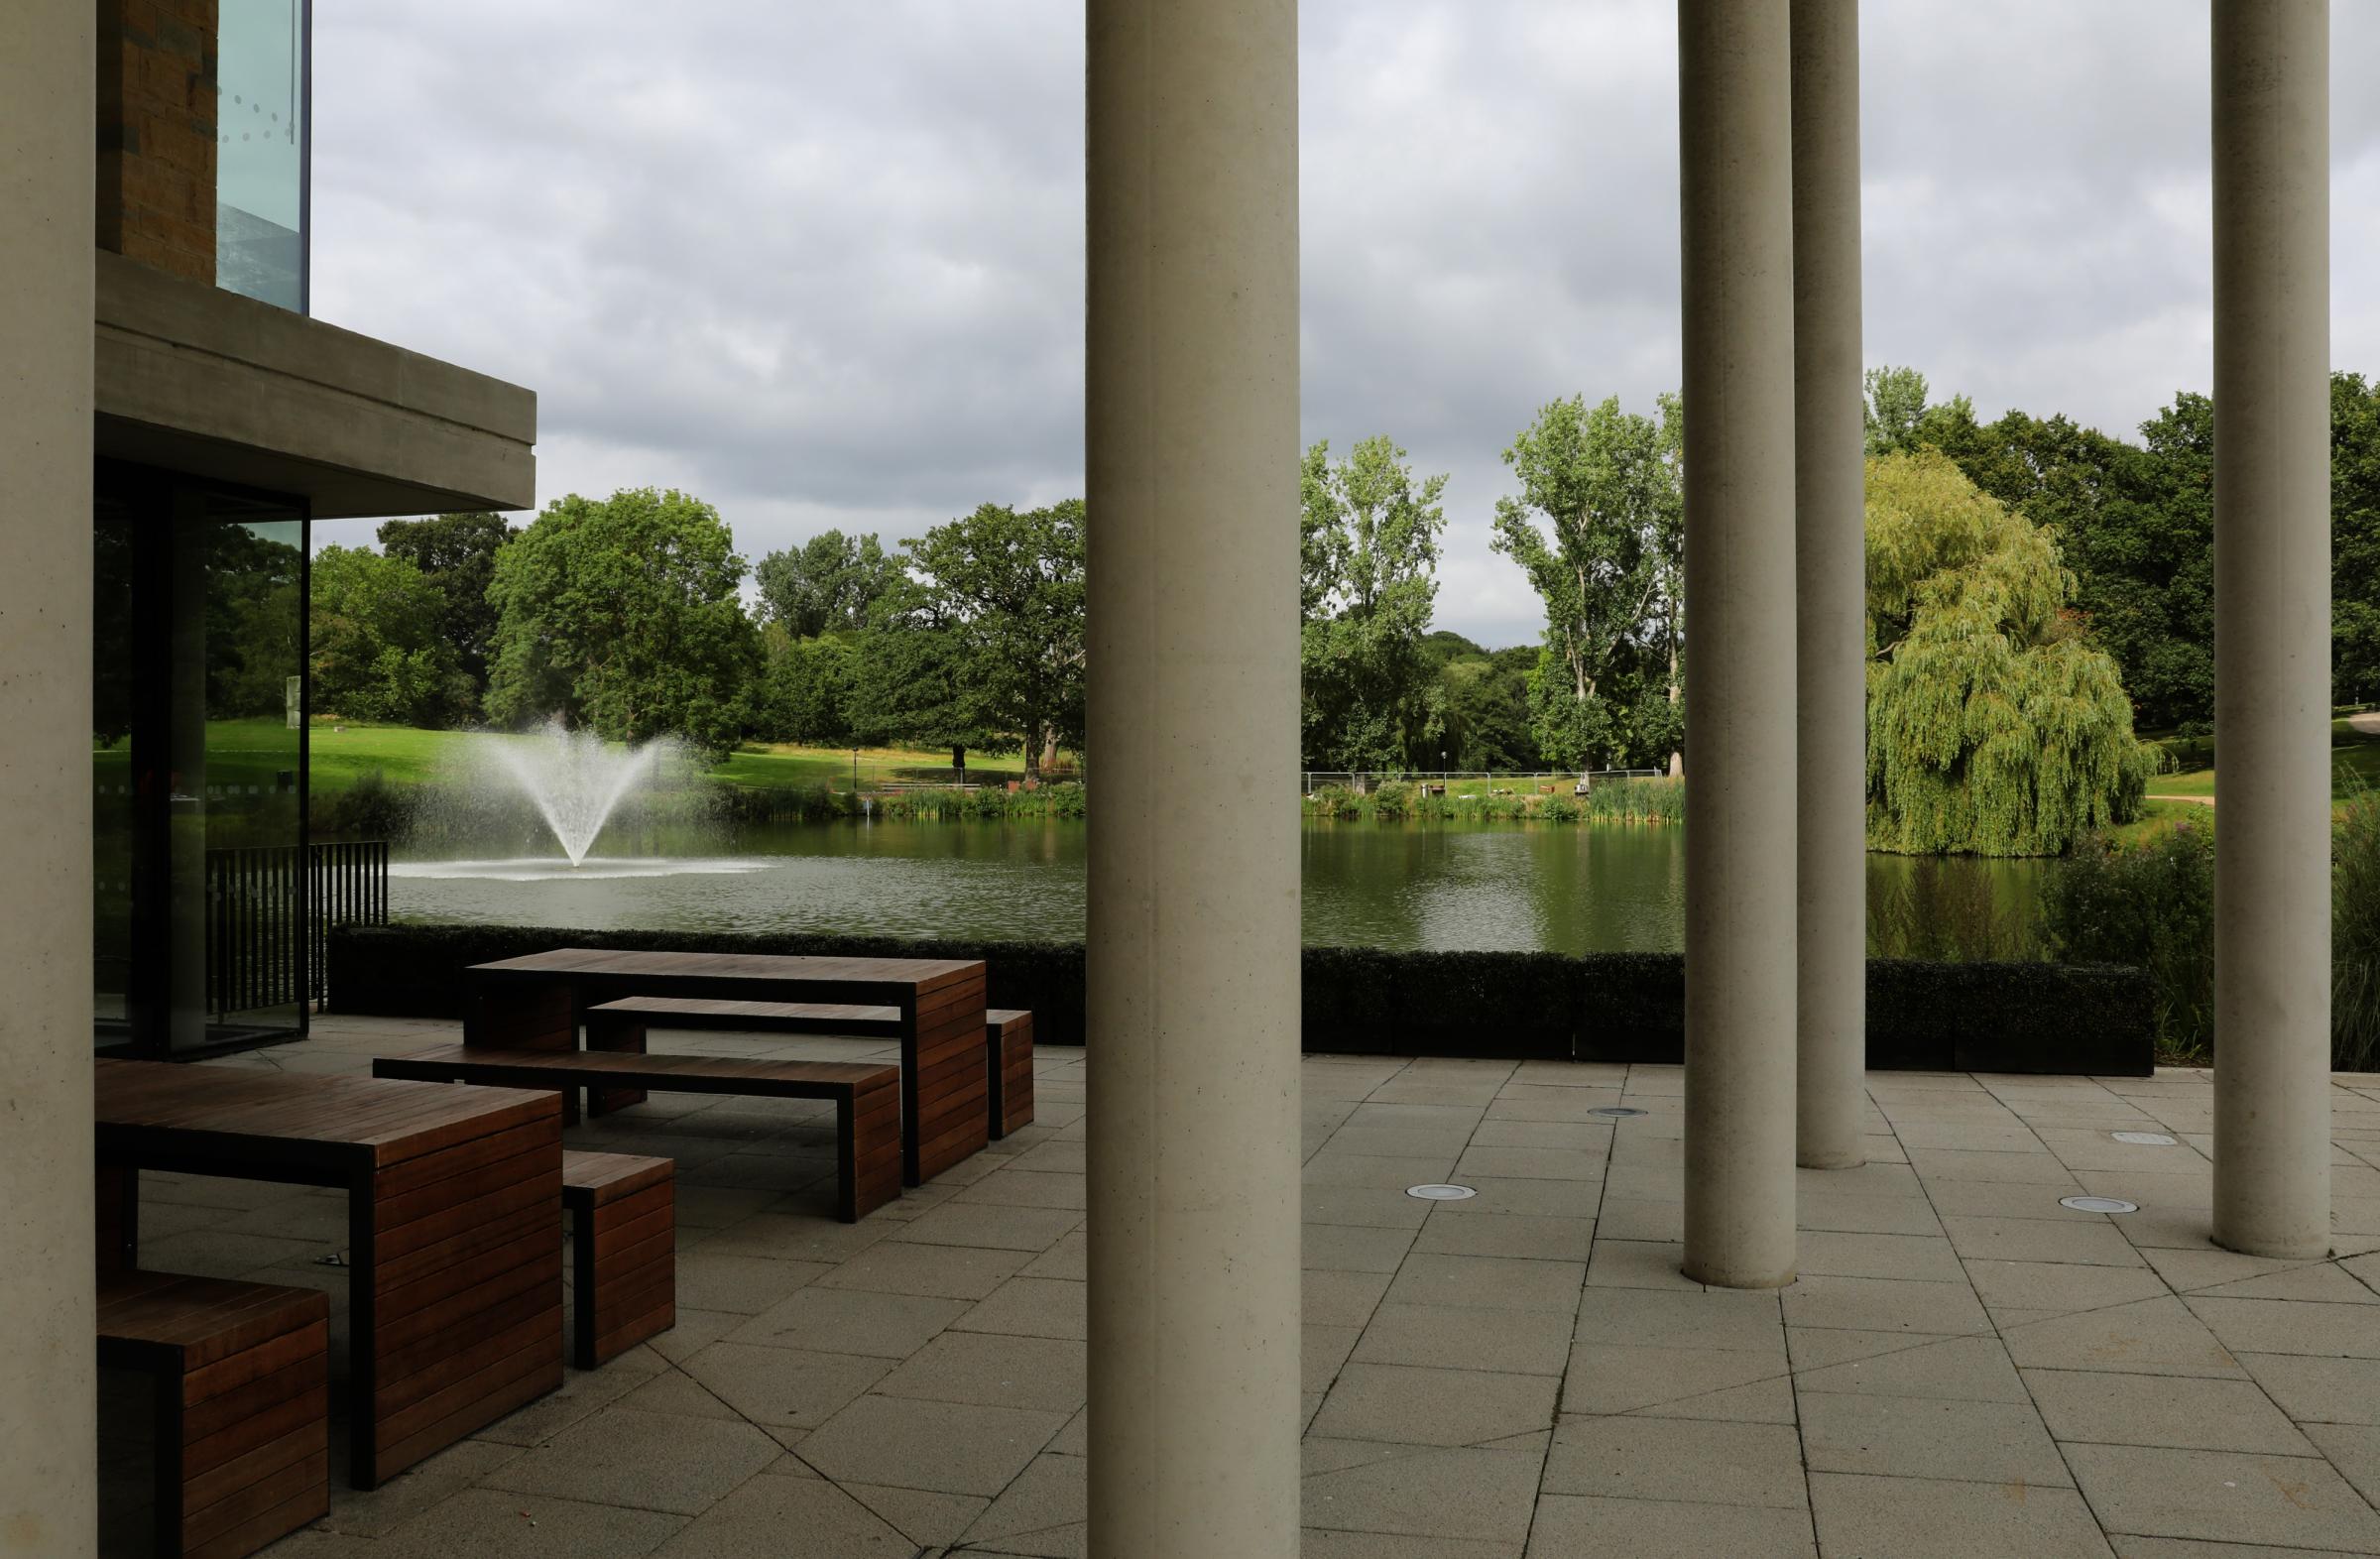 Contrast - a university campus building edges next to an impressive lake and water feature PICTURES: STEVE BRADING University of Essex grounds. Uni is shortlisted in Green Flag awards